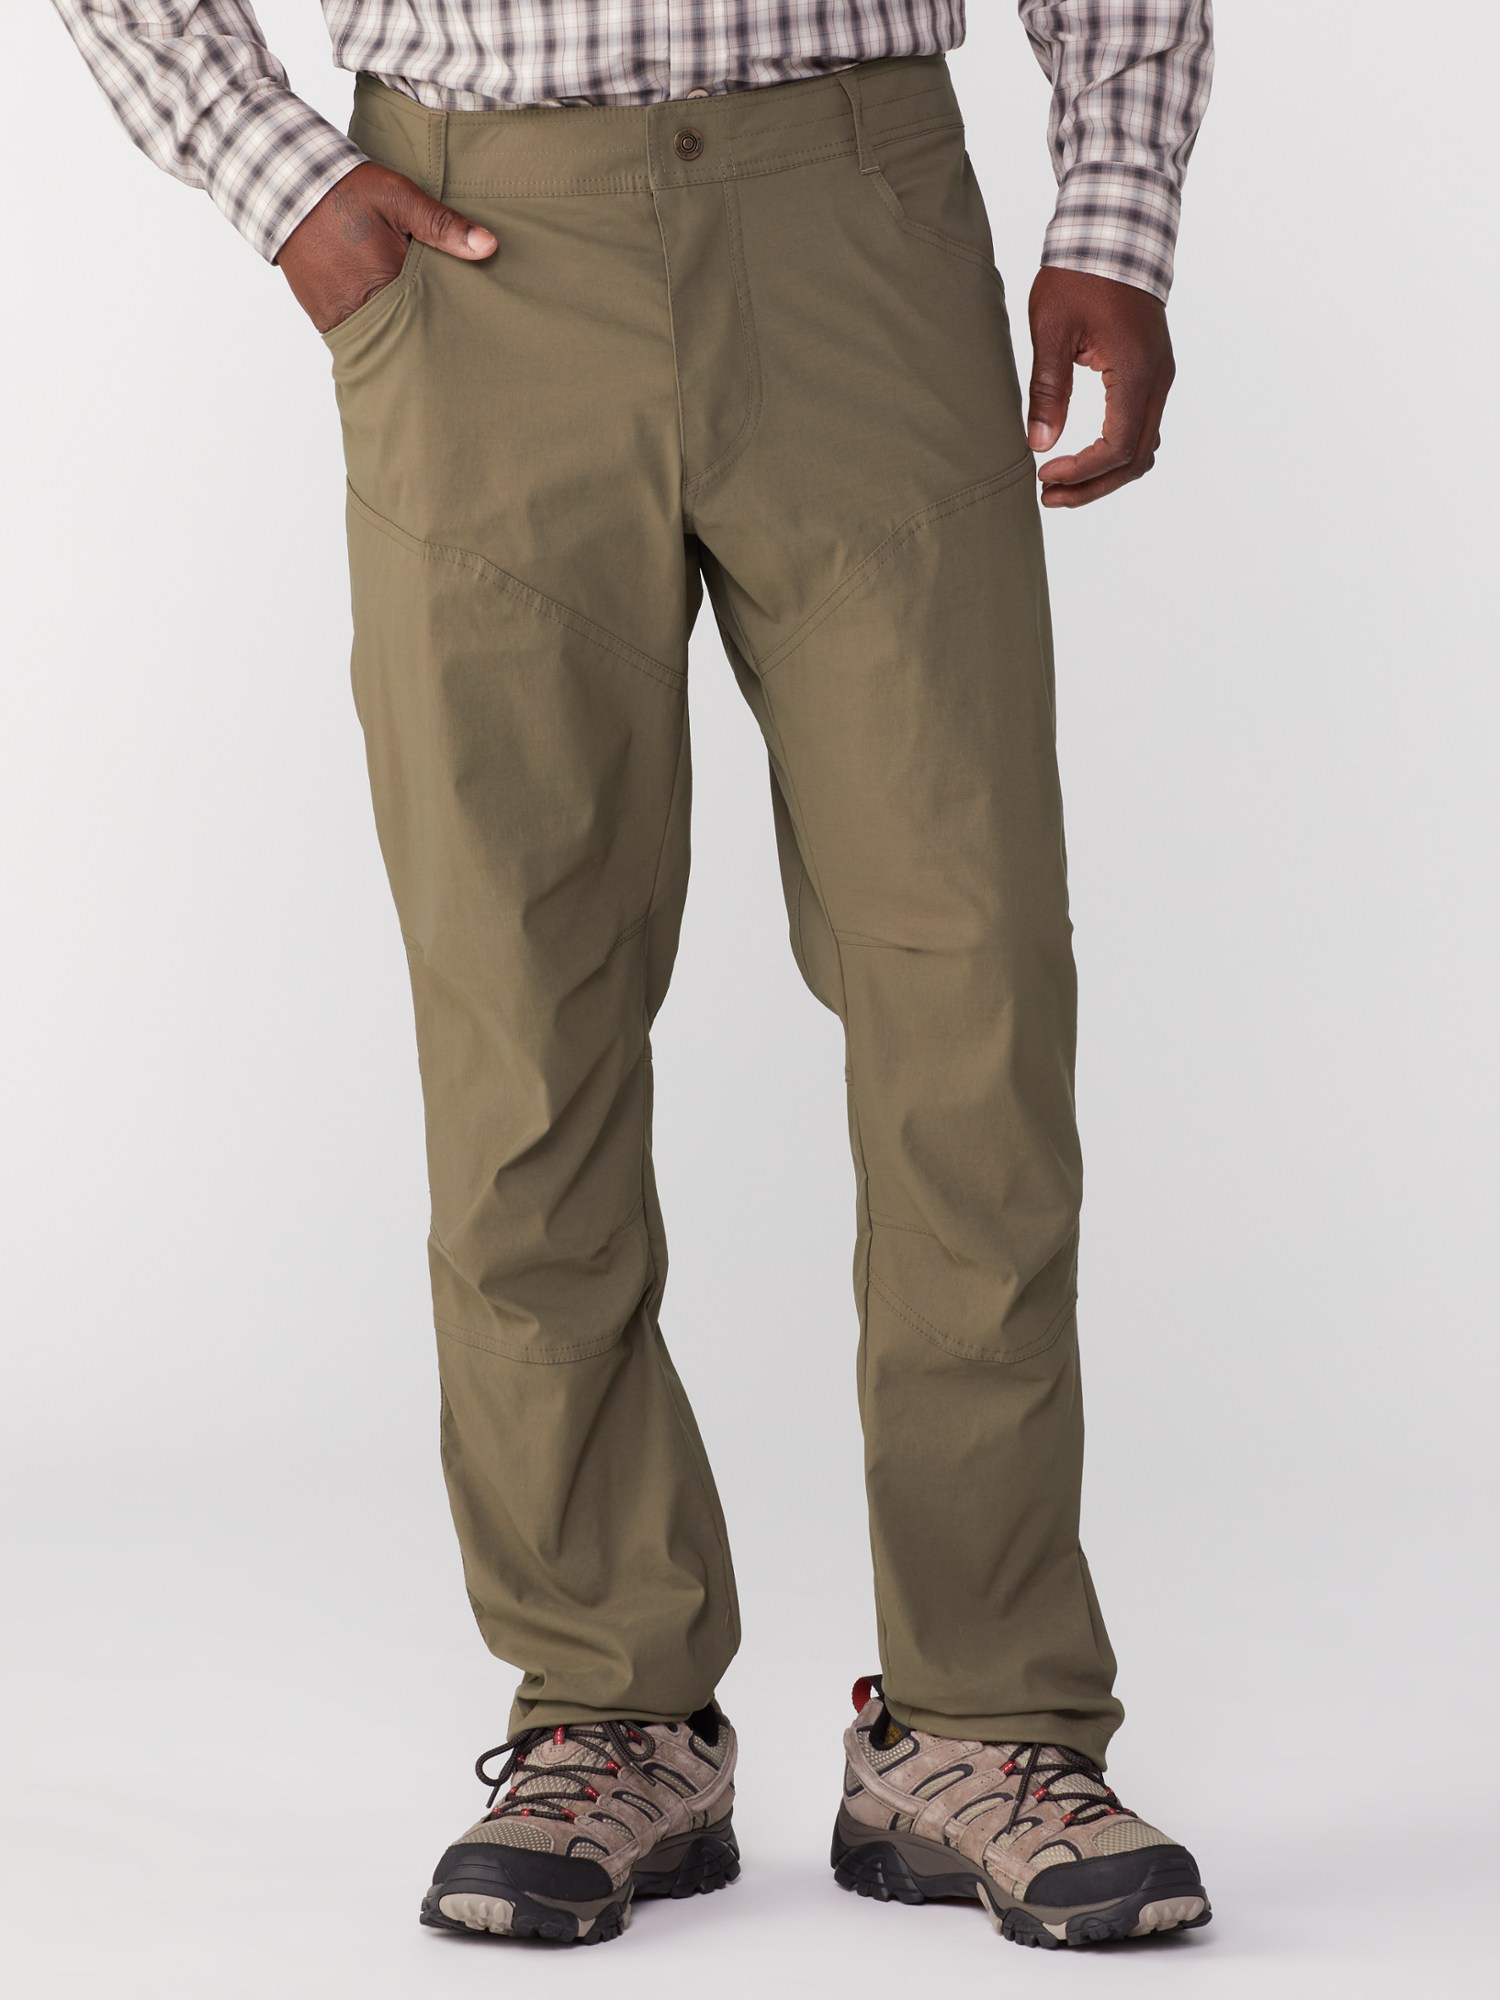 The Kuhl Renegade Rock Pants Are Now 50% Off at REI - Men's Journal